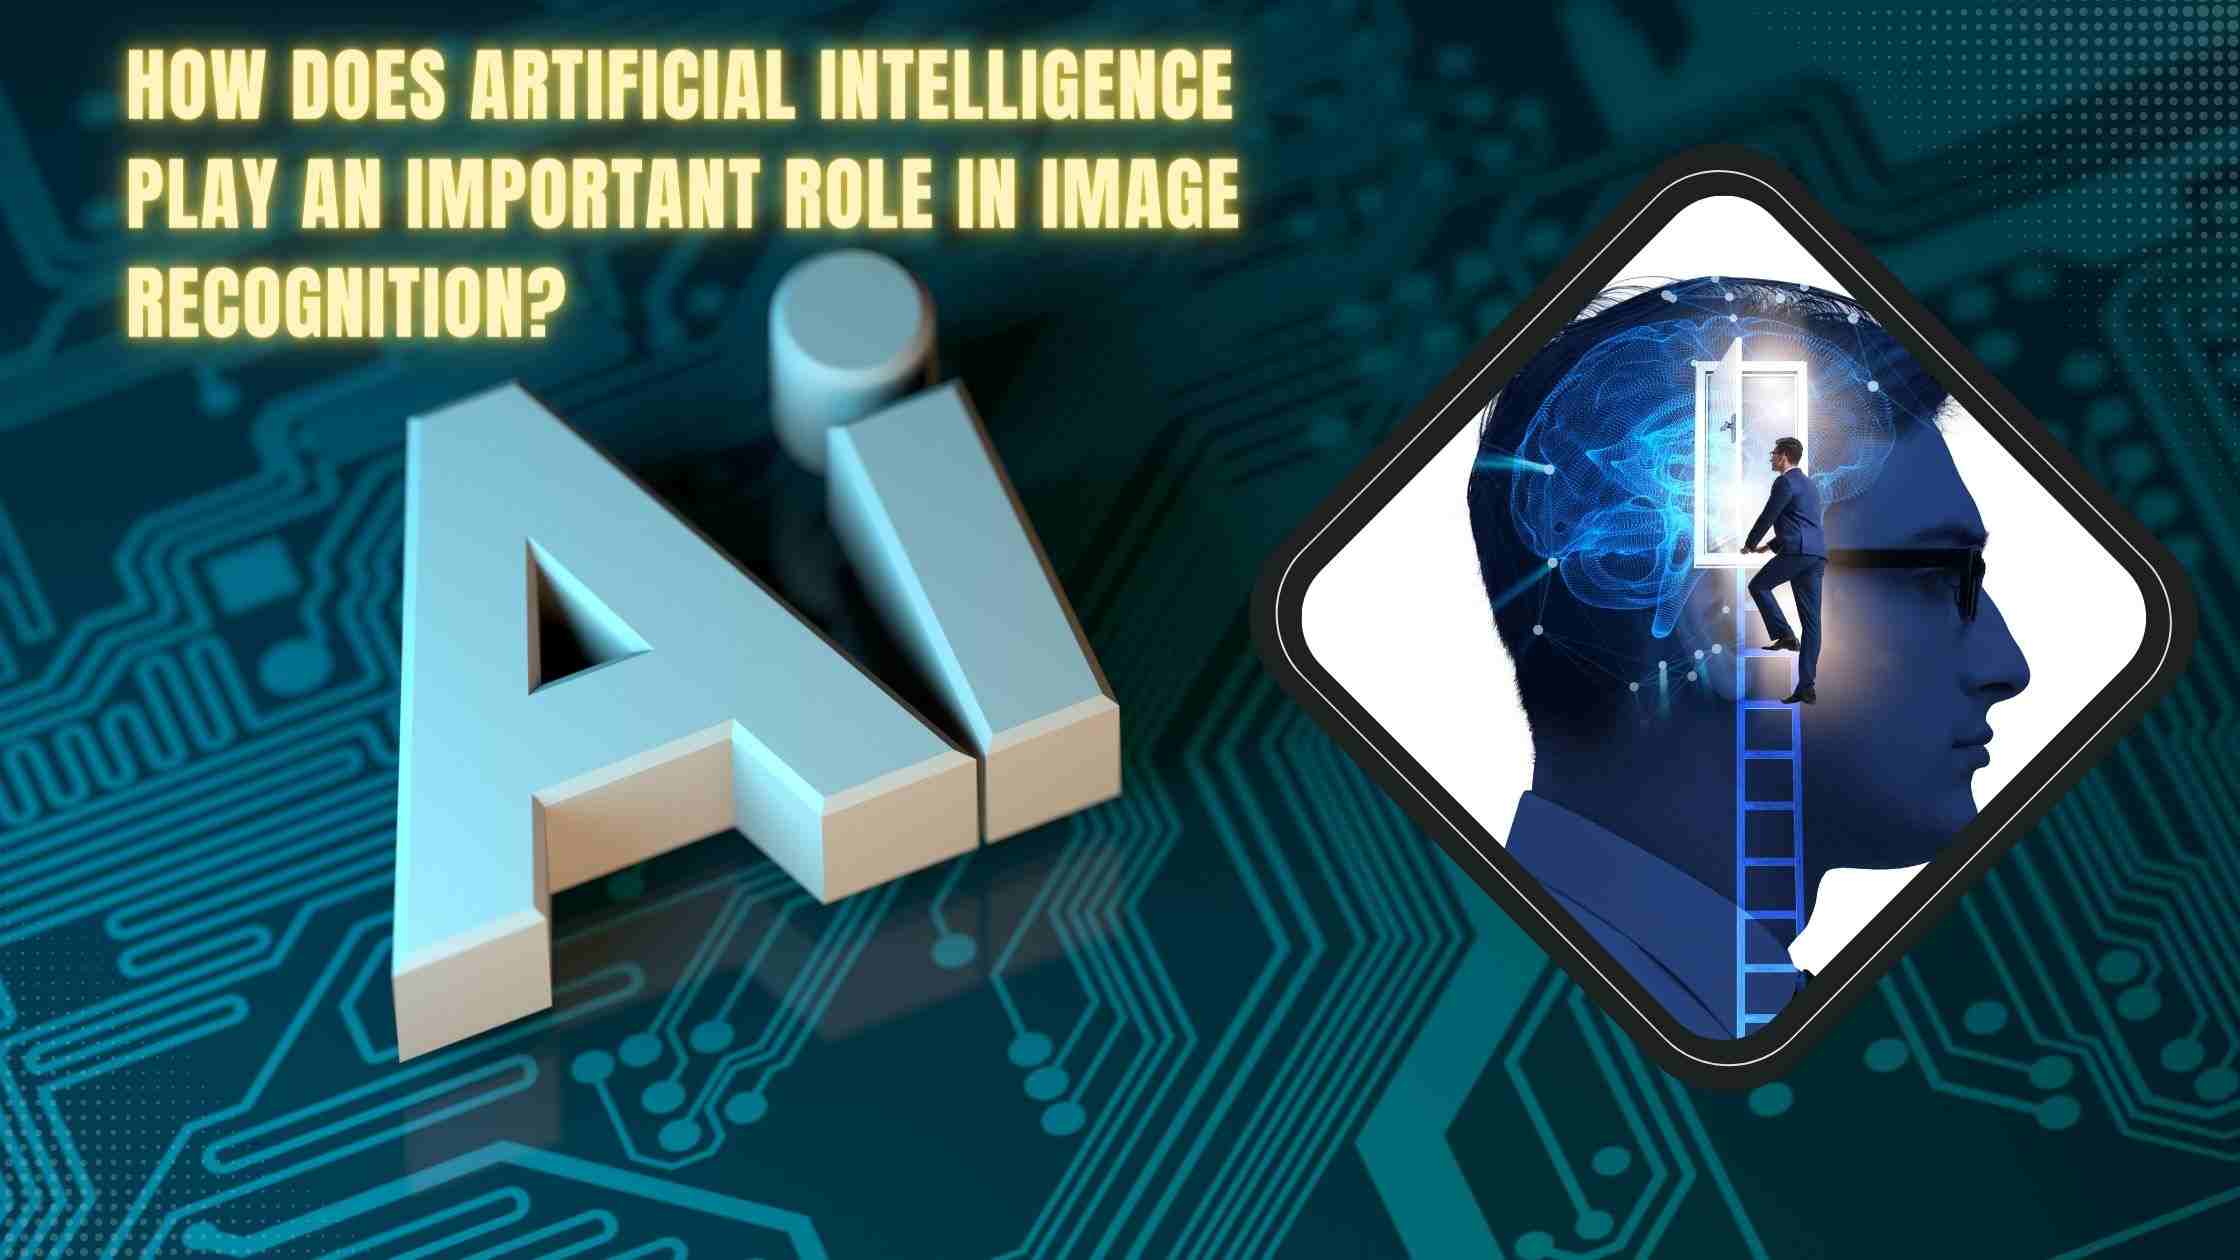 How Does Artificial Intelligence Play an Important Role in Image Recognition?